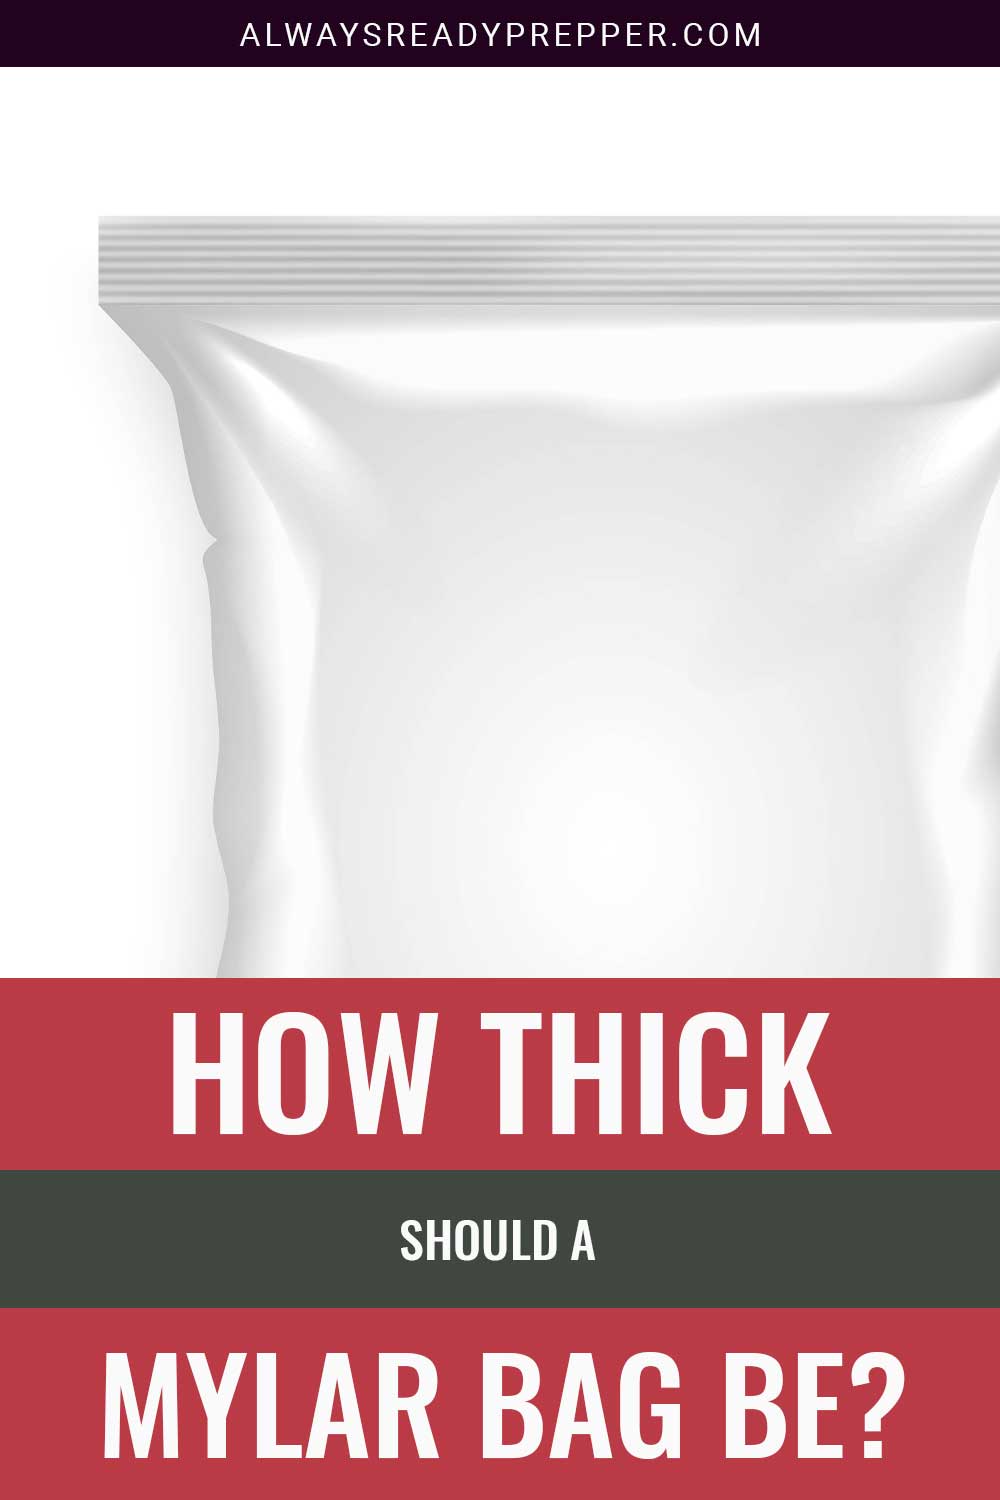 A white mylar bag - how thick should it be?